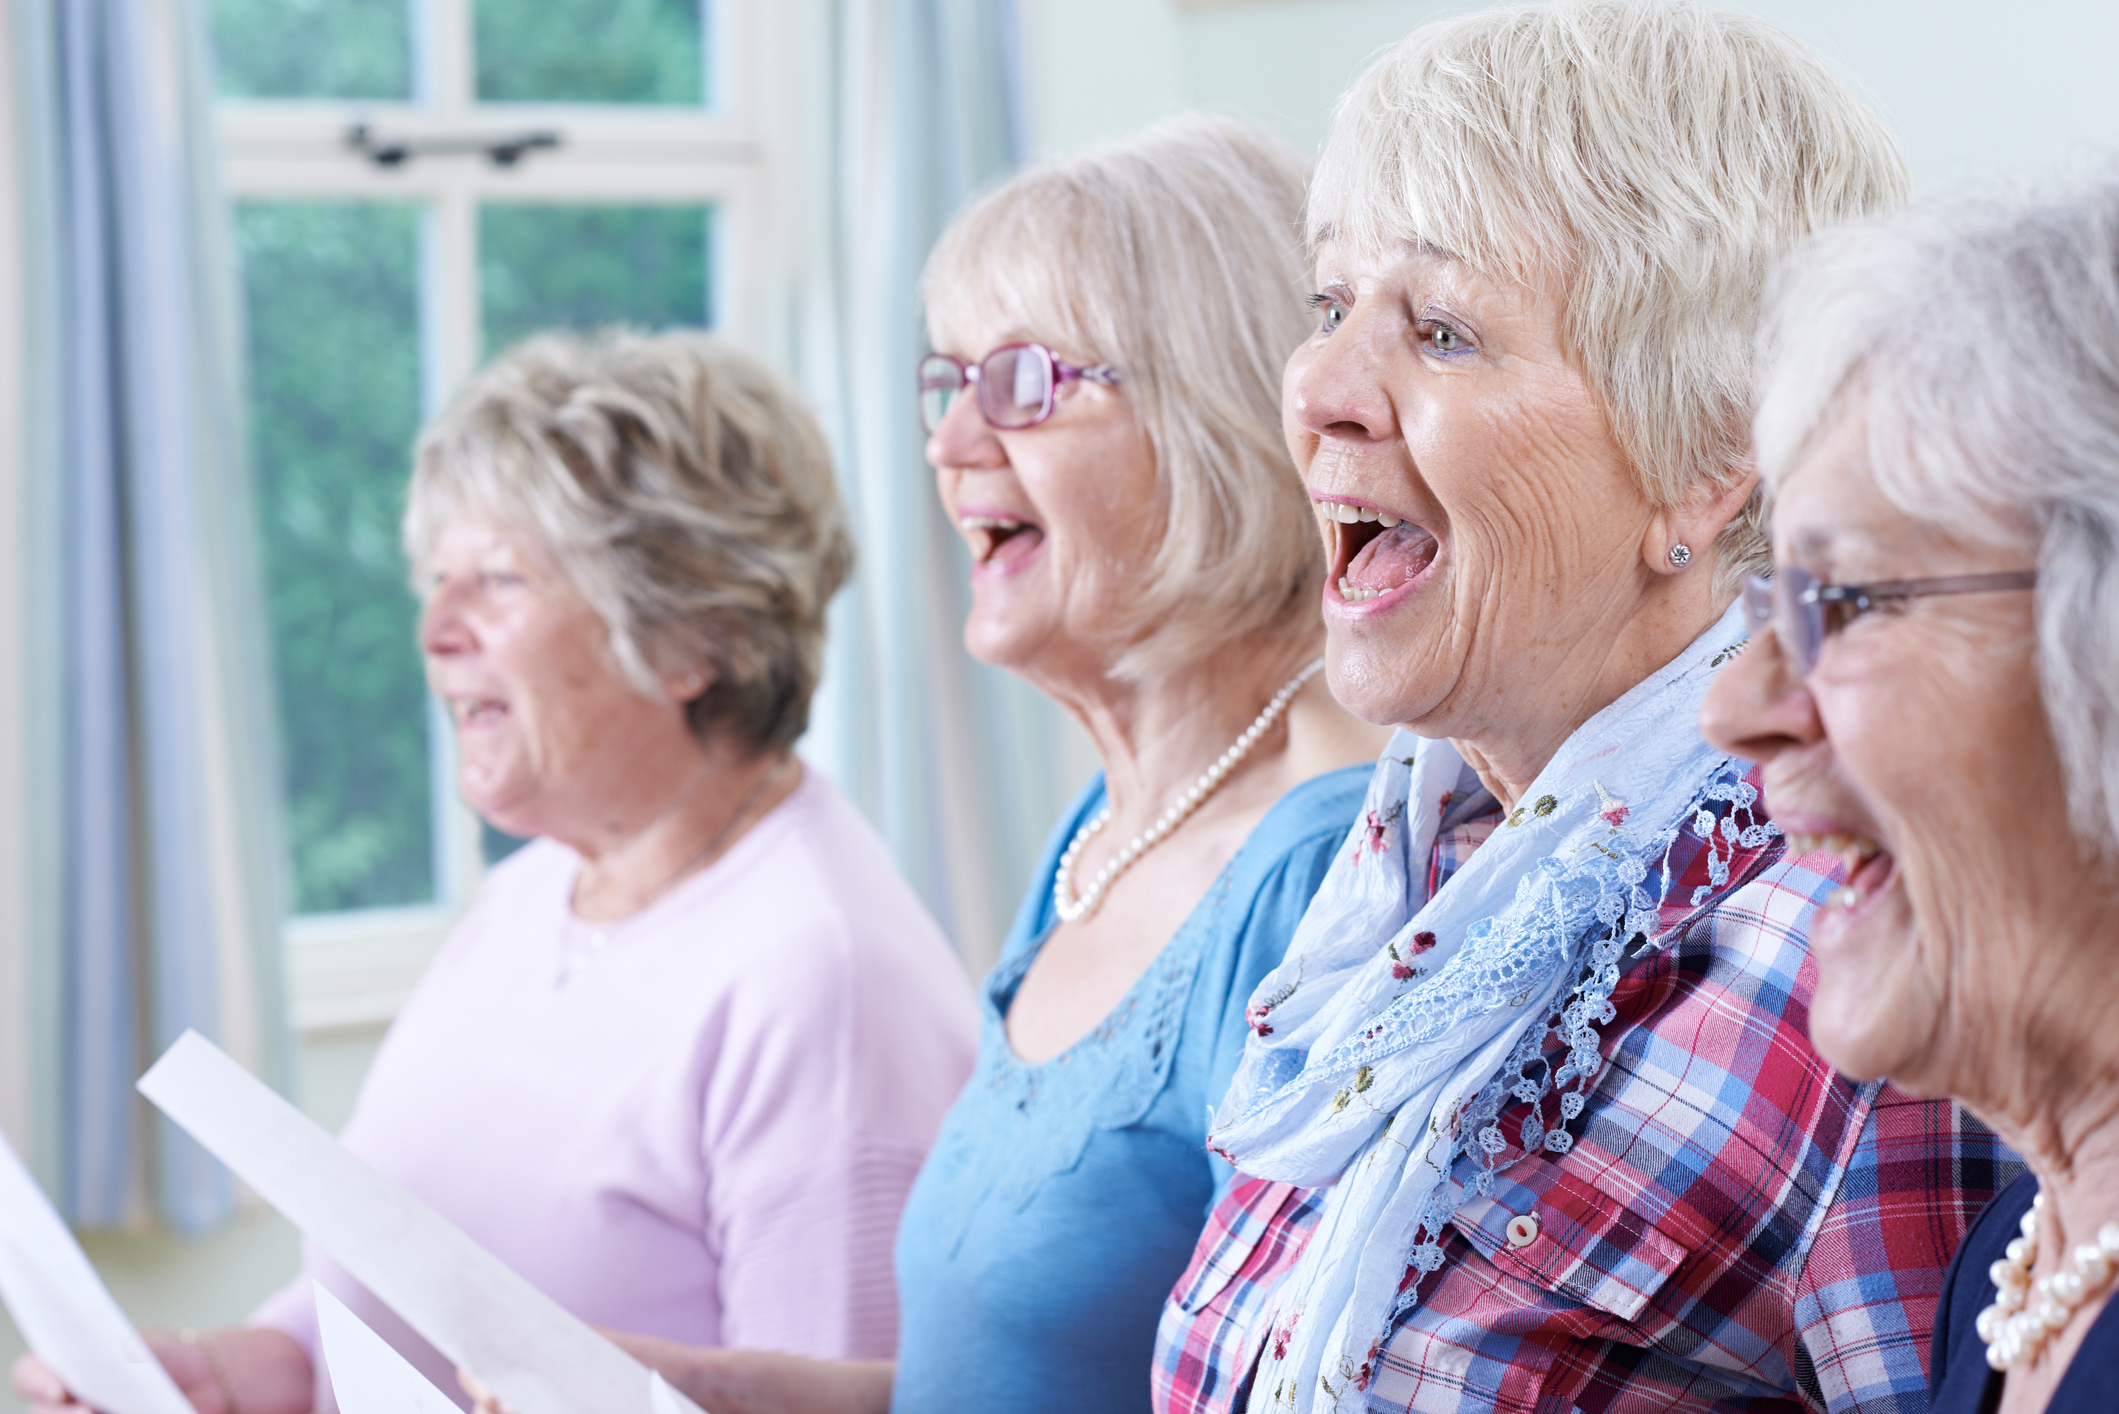 Cognitive decline and aphasia: How singing can help